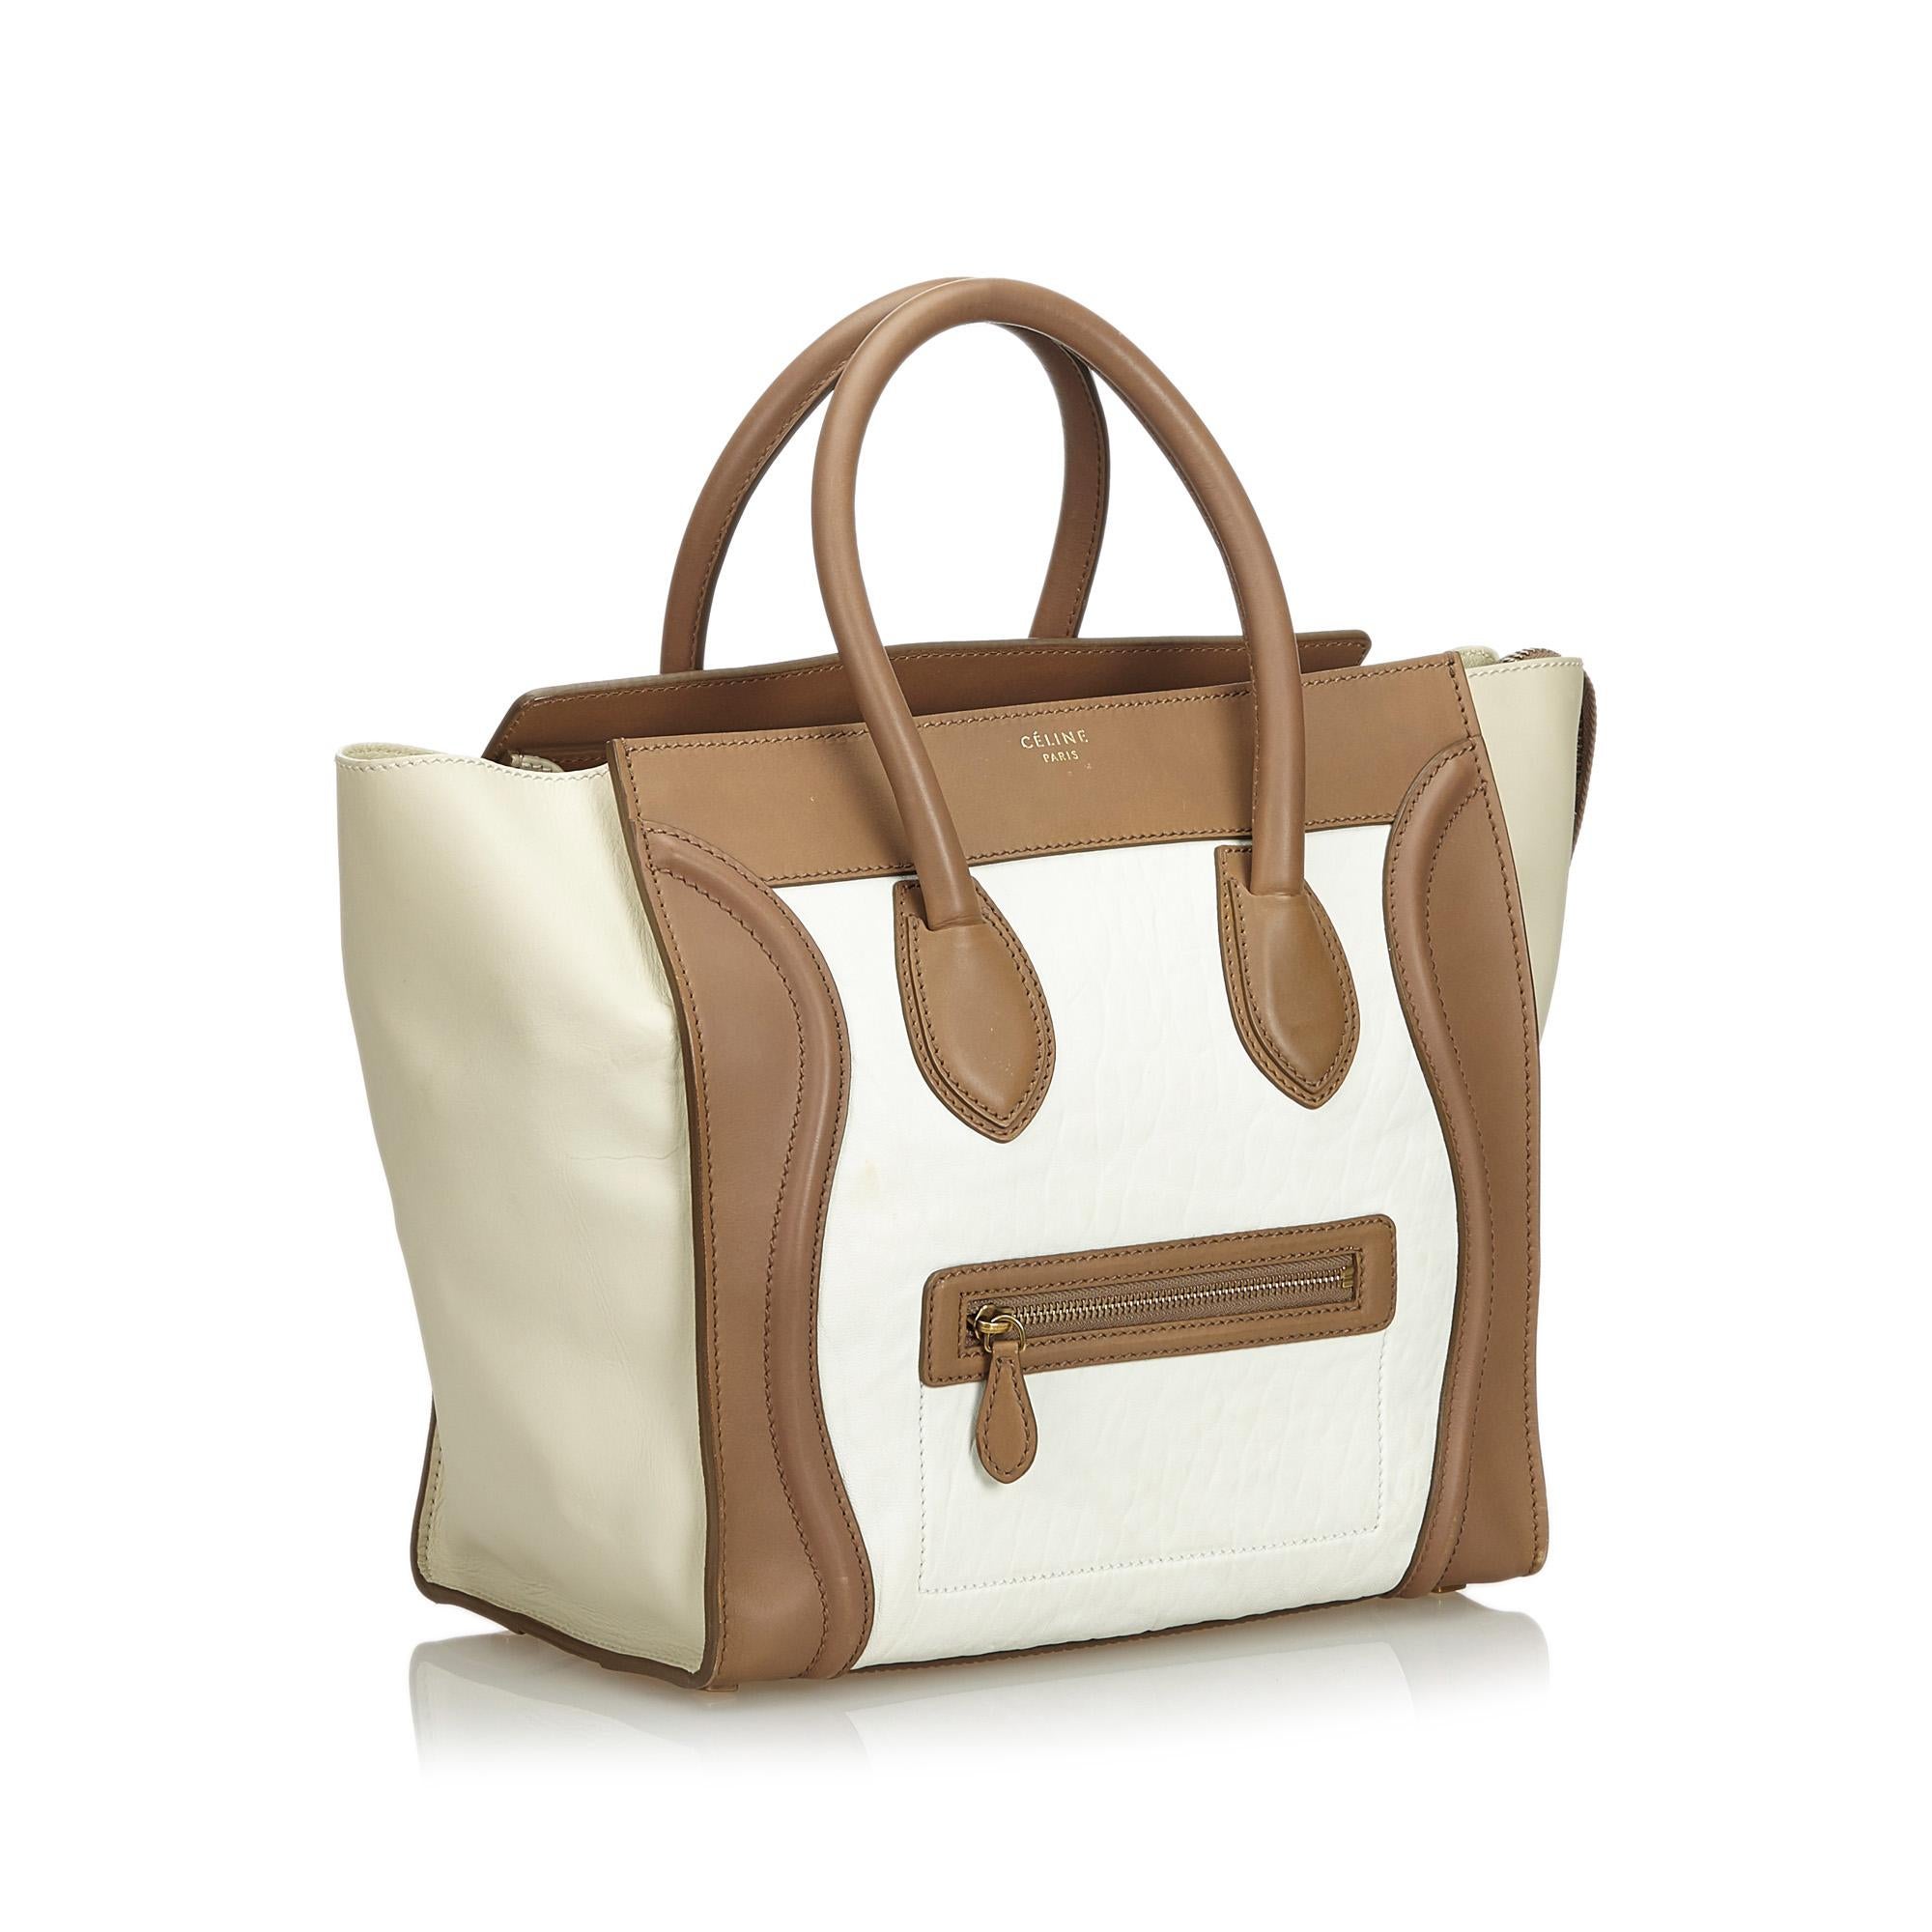 The Phantom tote bag features a leather body, a front exterior zip pocket, rolled leather handles, an open top, and interior zip pocket. It carries as B+ condition rating.

Inclusions: 
This item does not come with inclusions.

Dimensions:
Length: